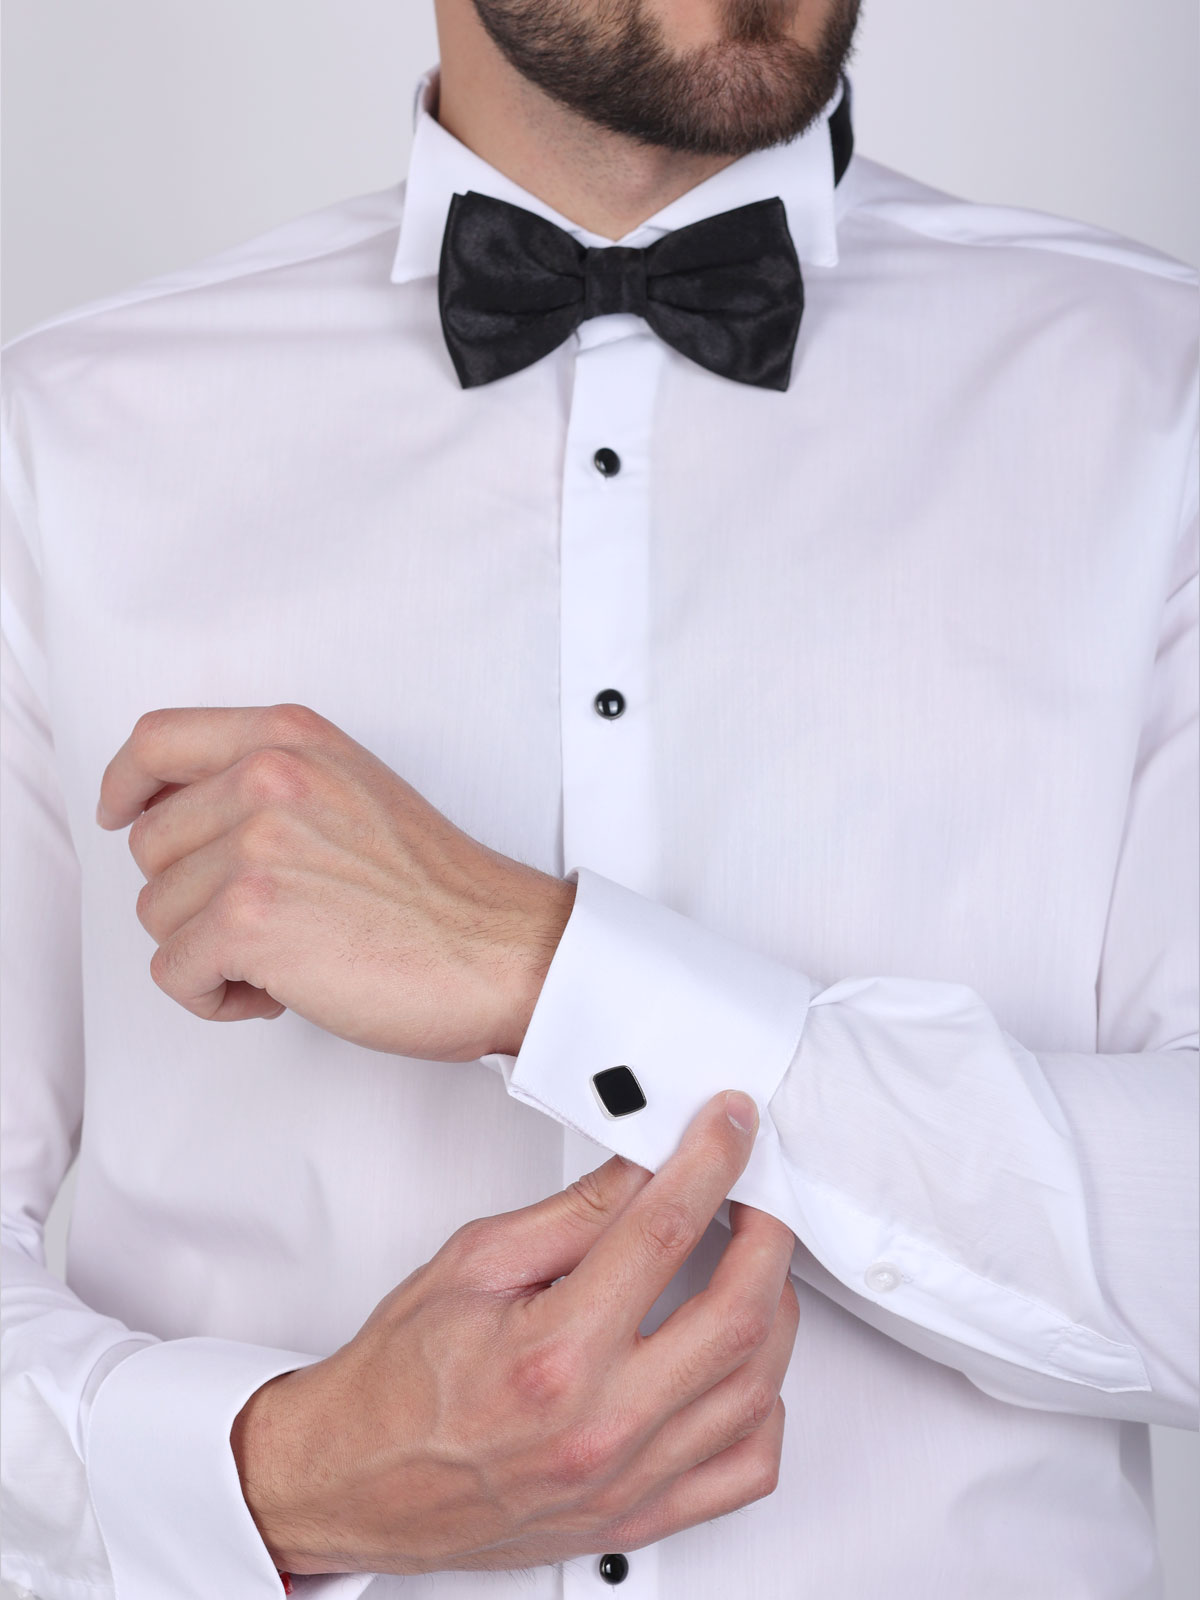 Bow tie shirt in white - 21541 € 48.37 img3